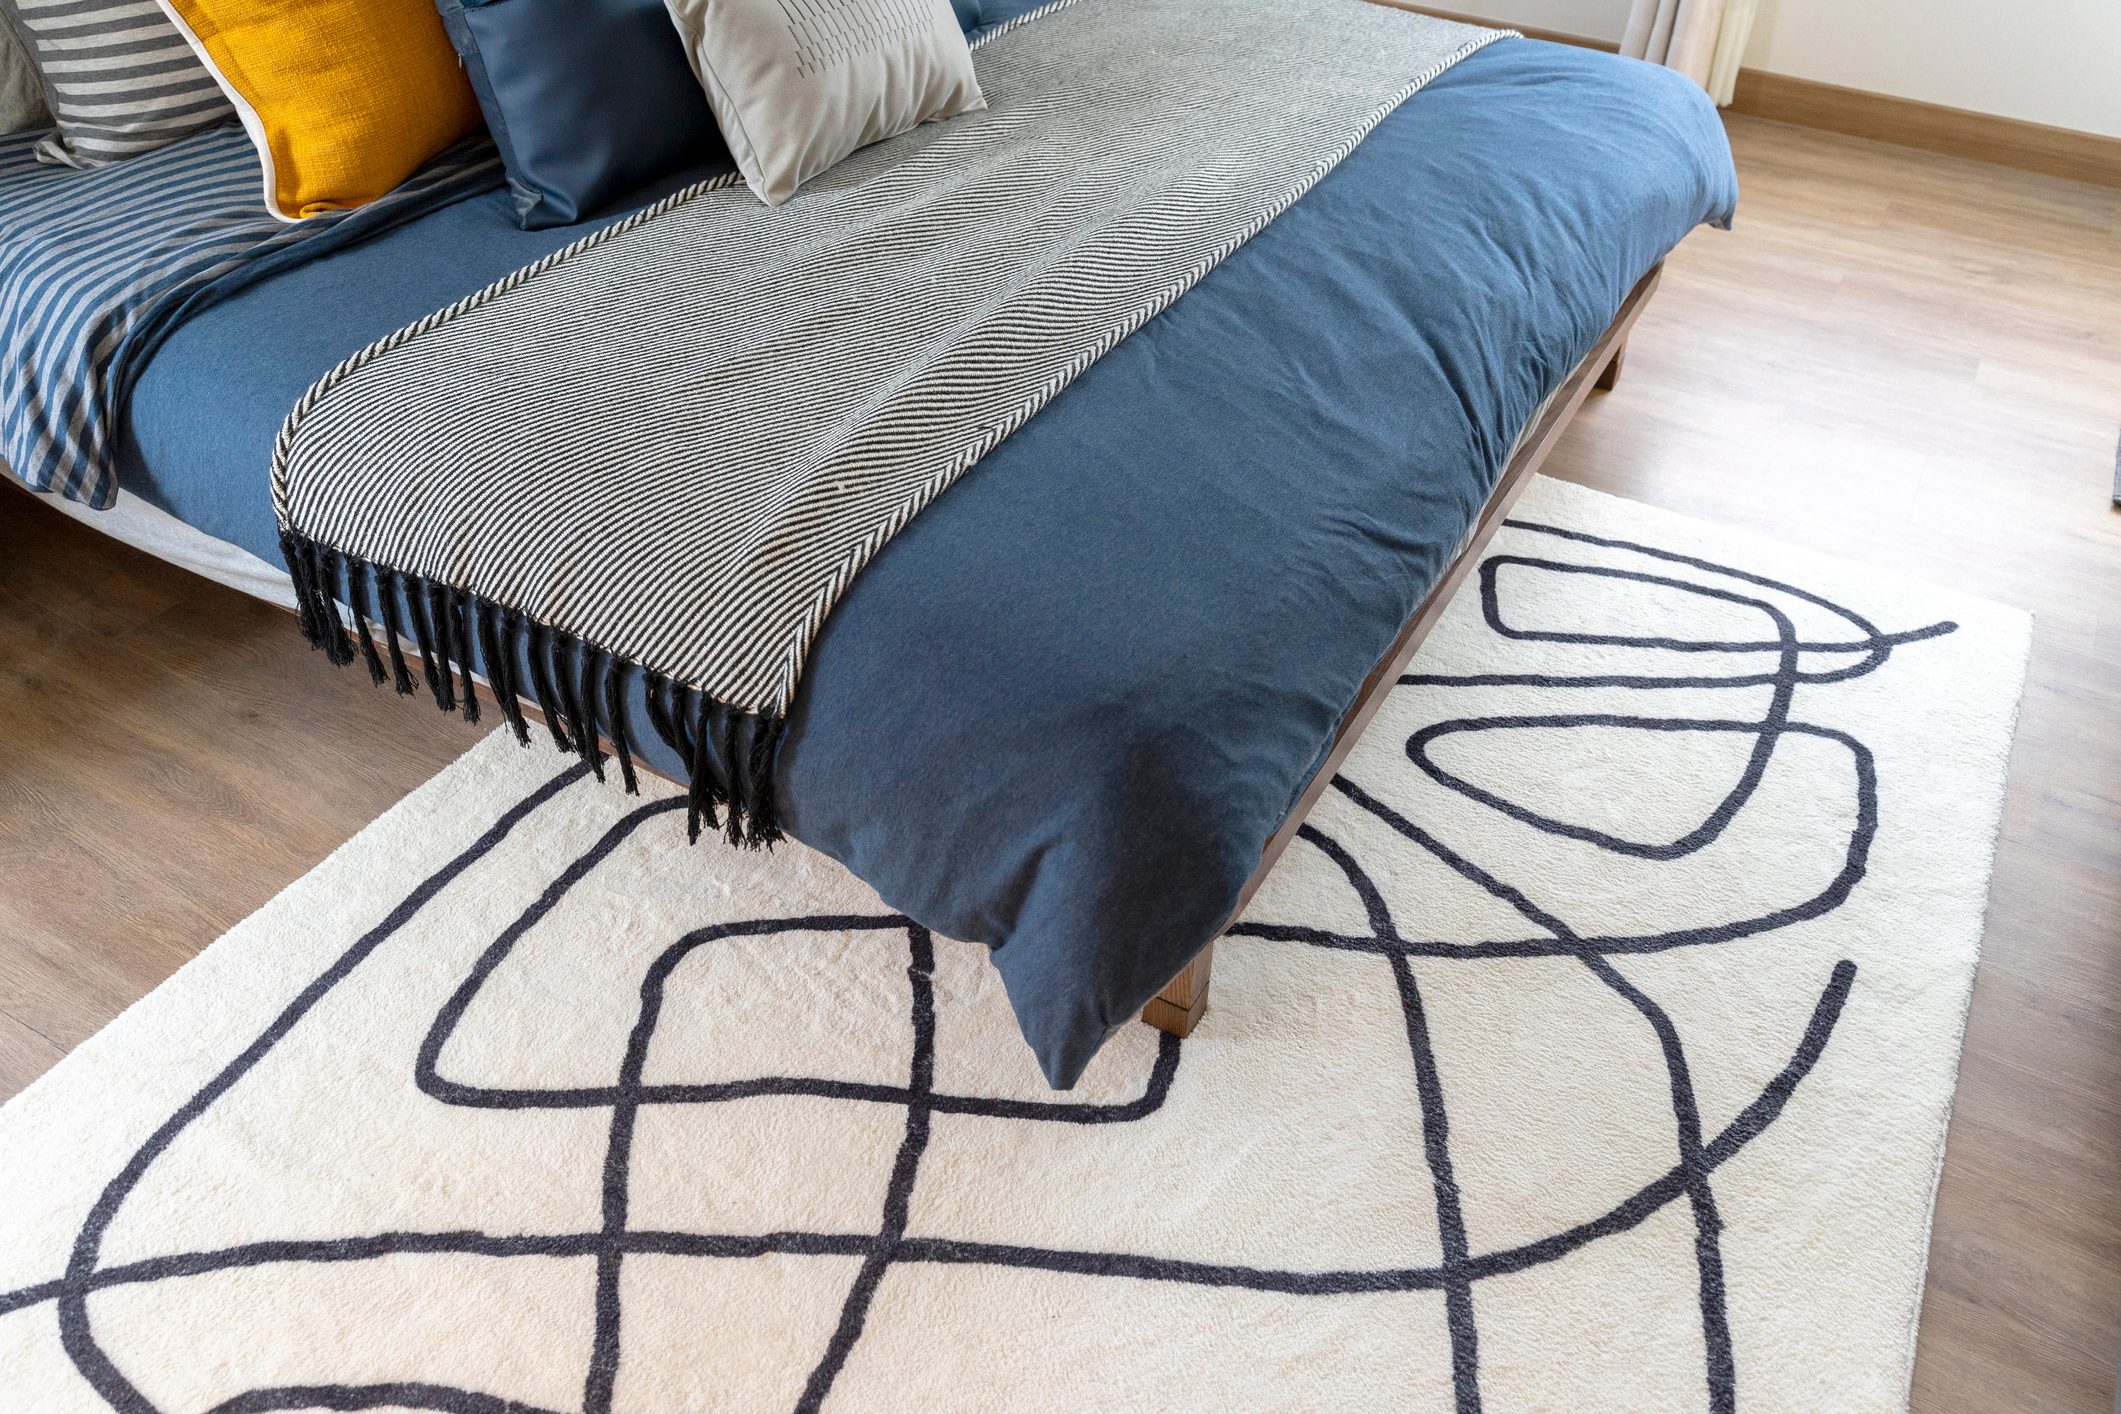 Modern graphic rug on the floor in a bedroom.